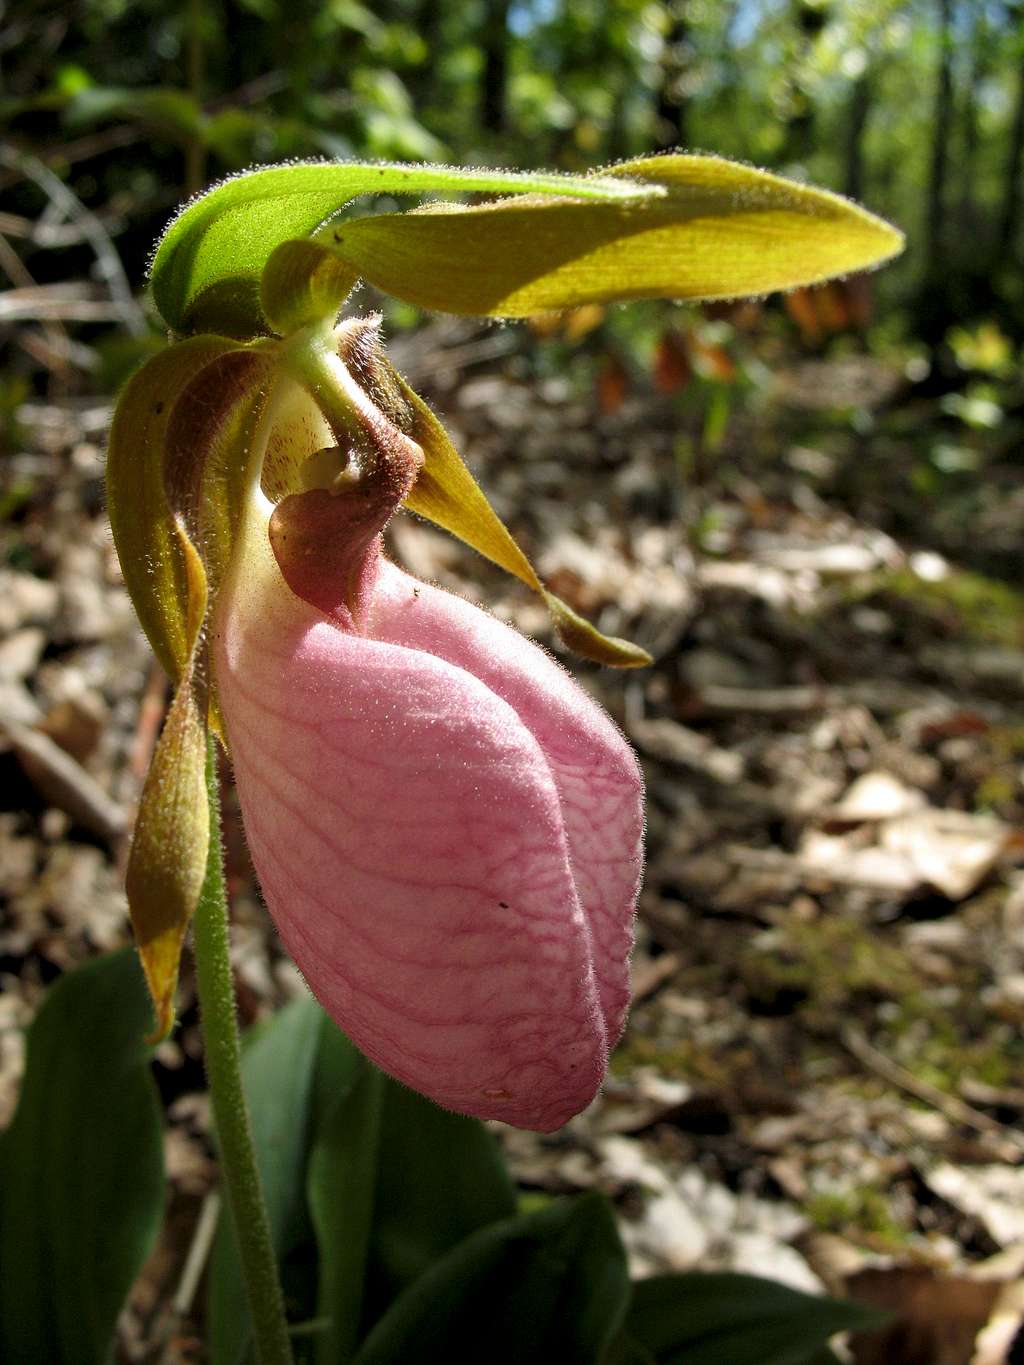 The Elusive Pink Lady's Slipper